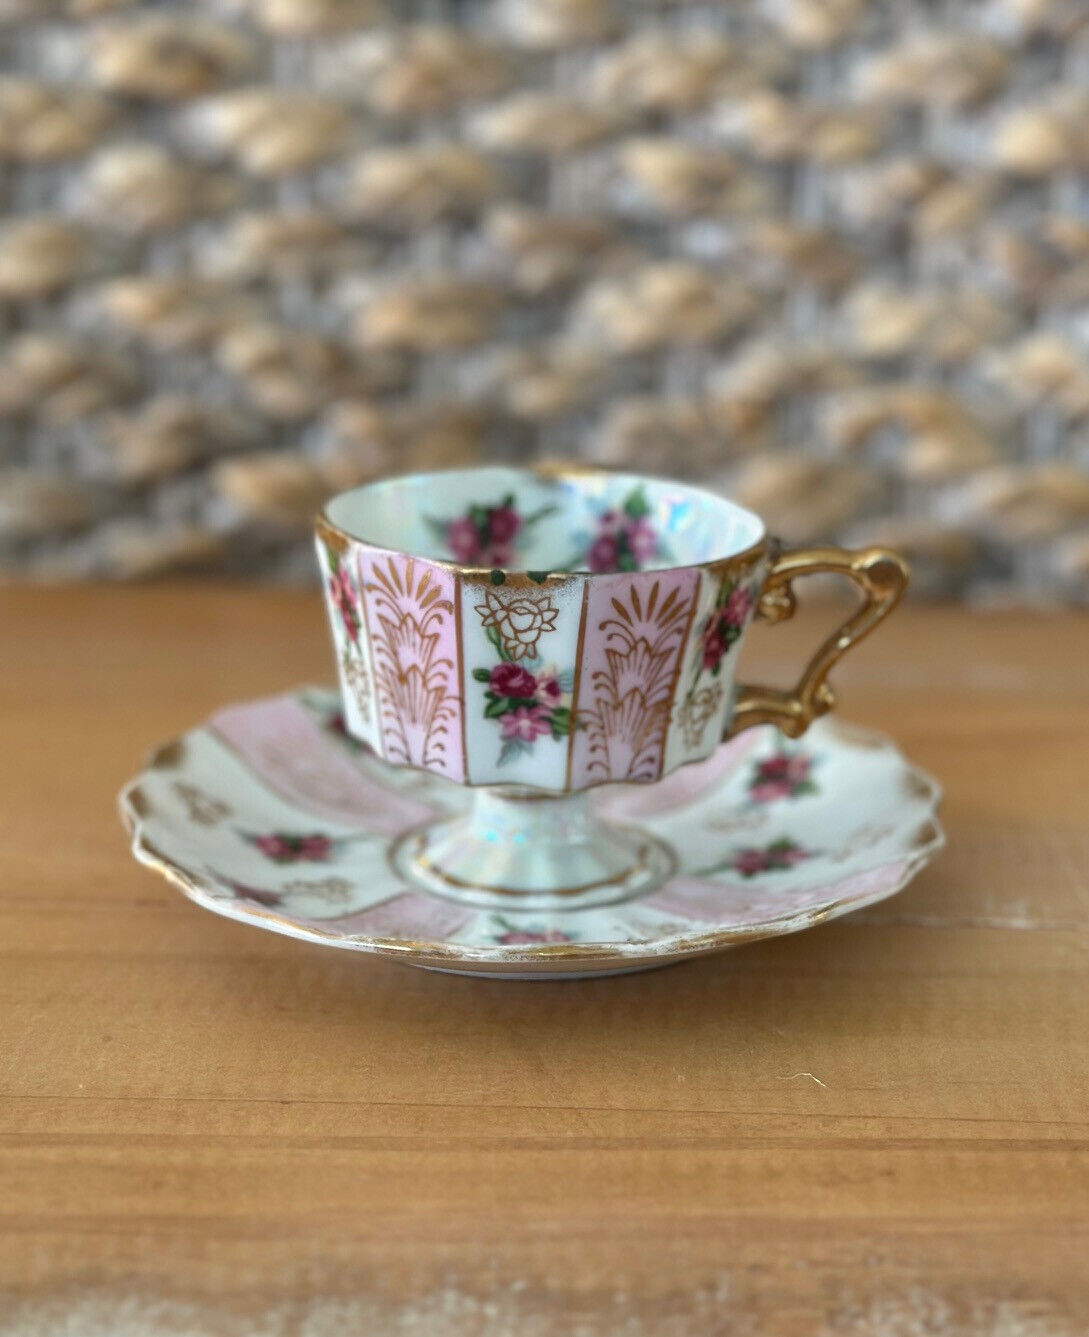 Vintage UCAGCO Iridescent Pink And White Teacup and Saucer Set Made in Japan